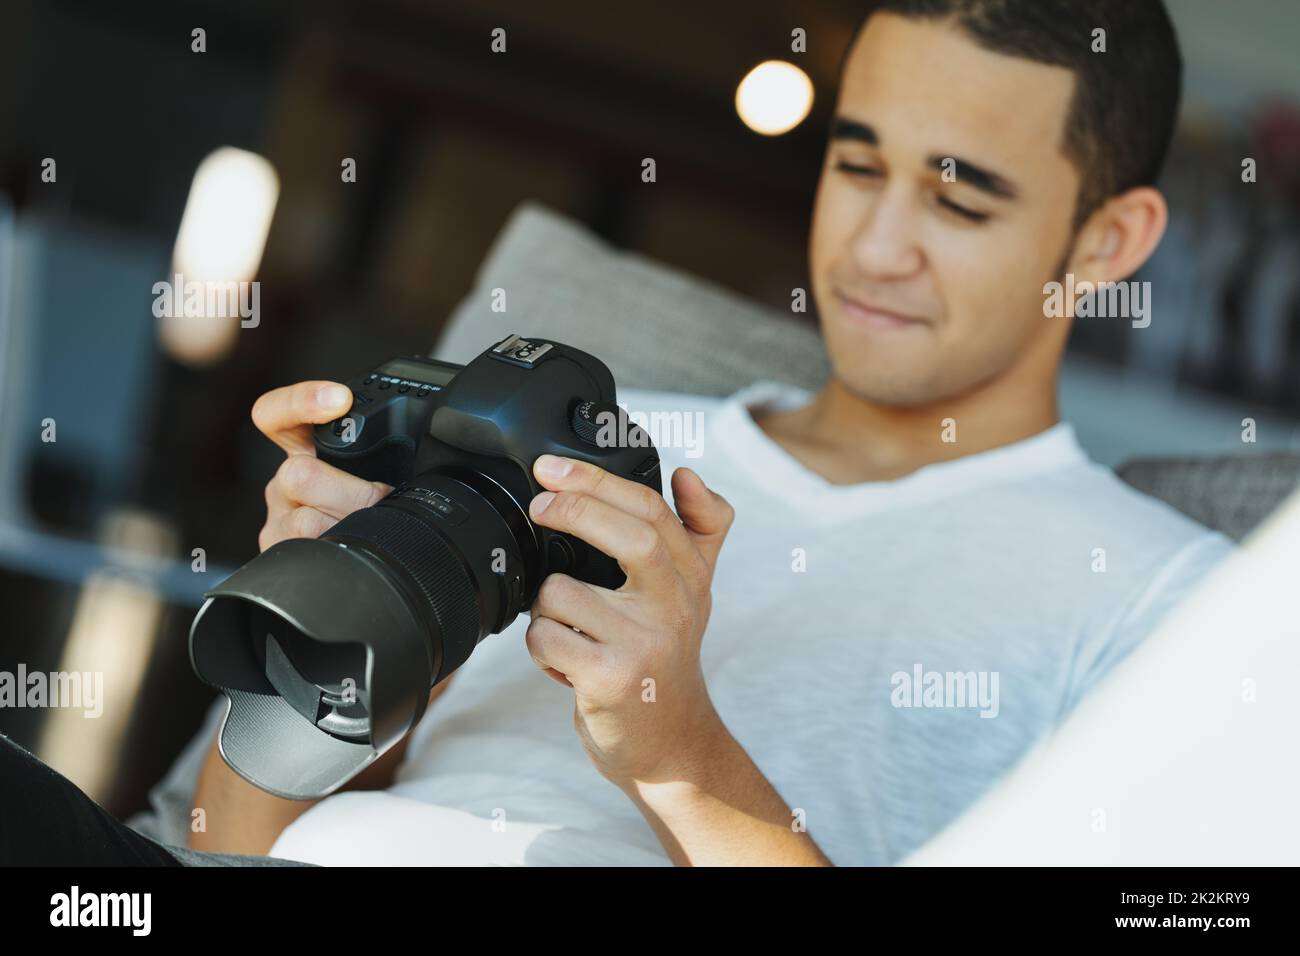 Young Black photographer chimping his photo on his camera Stock Photo